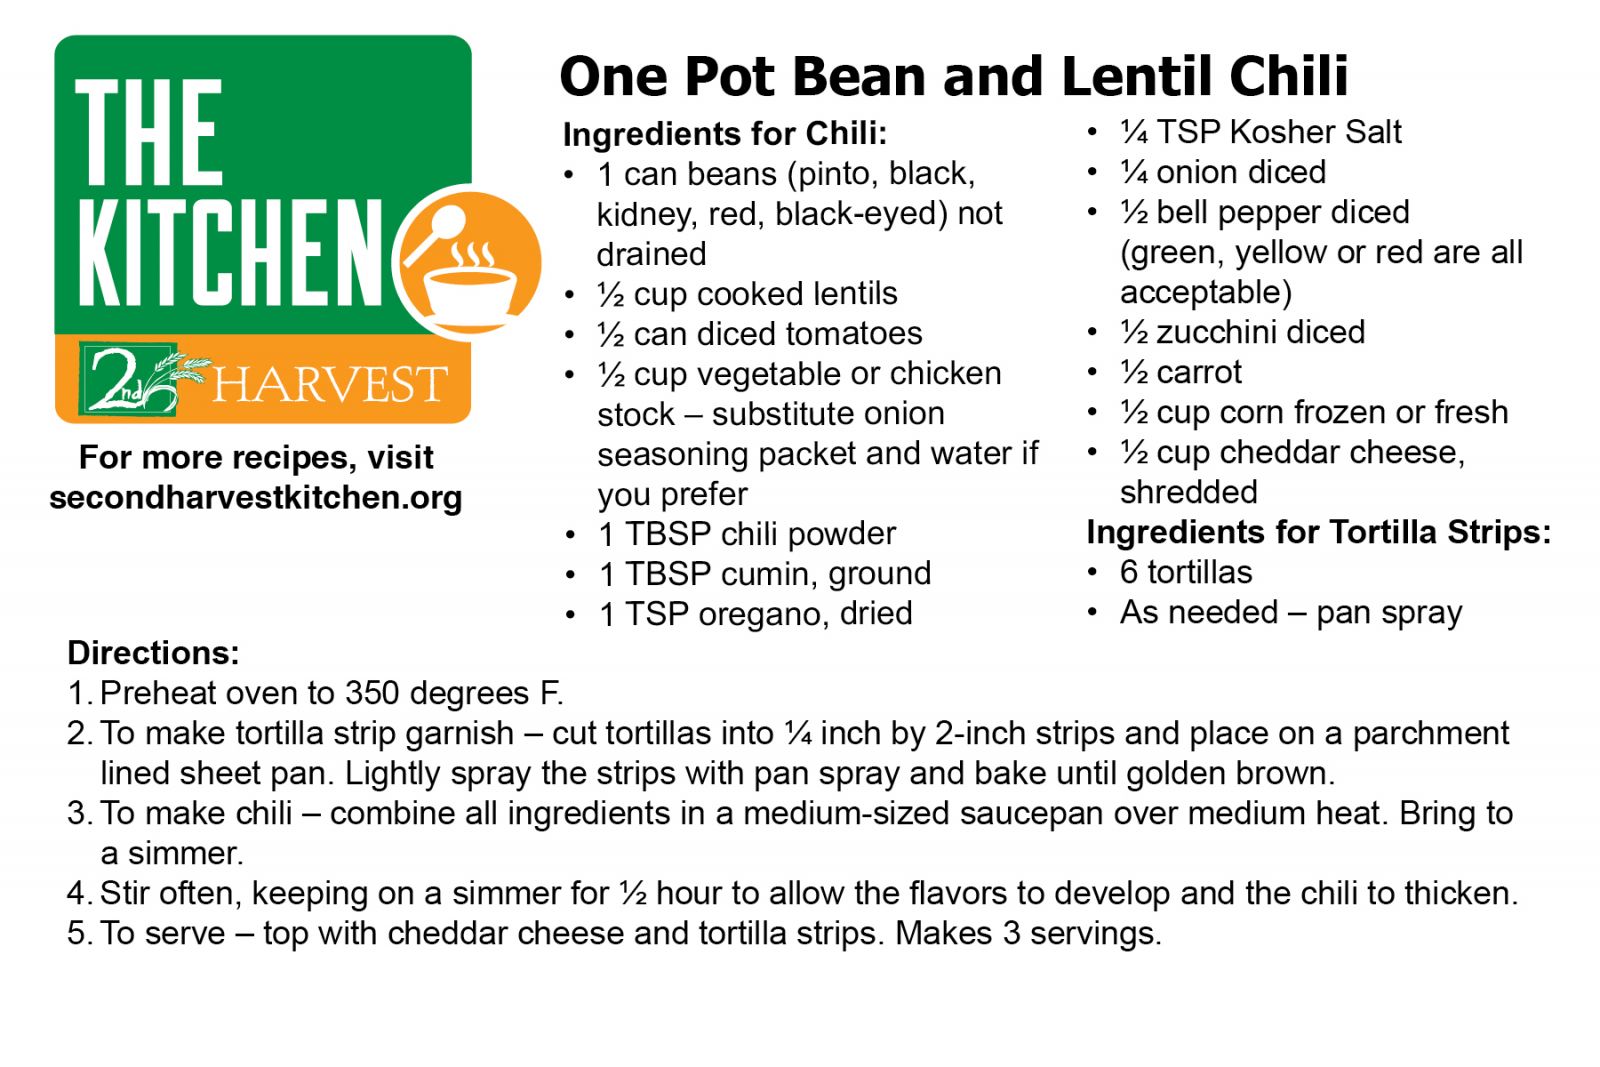 One Pot Bean and Lentil Chili